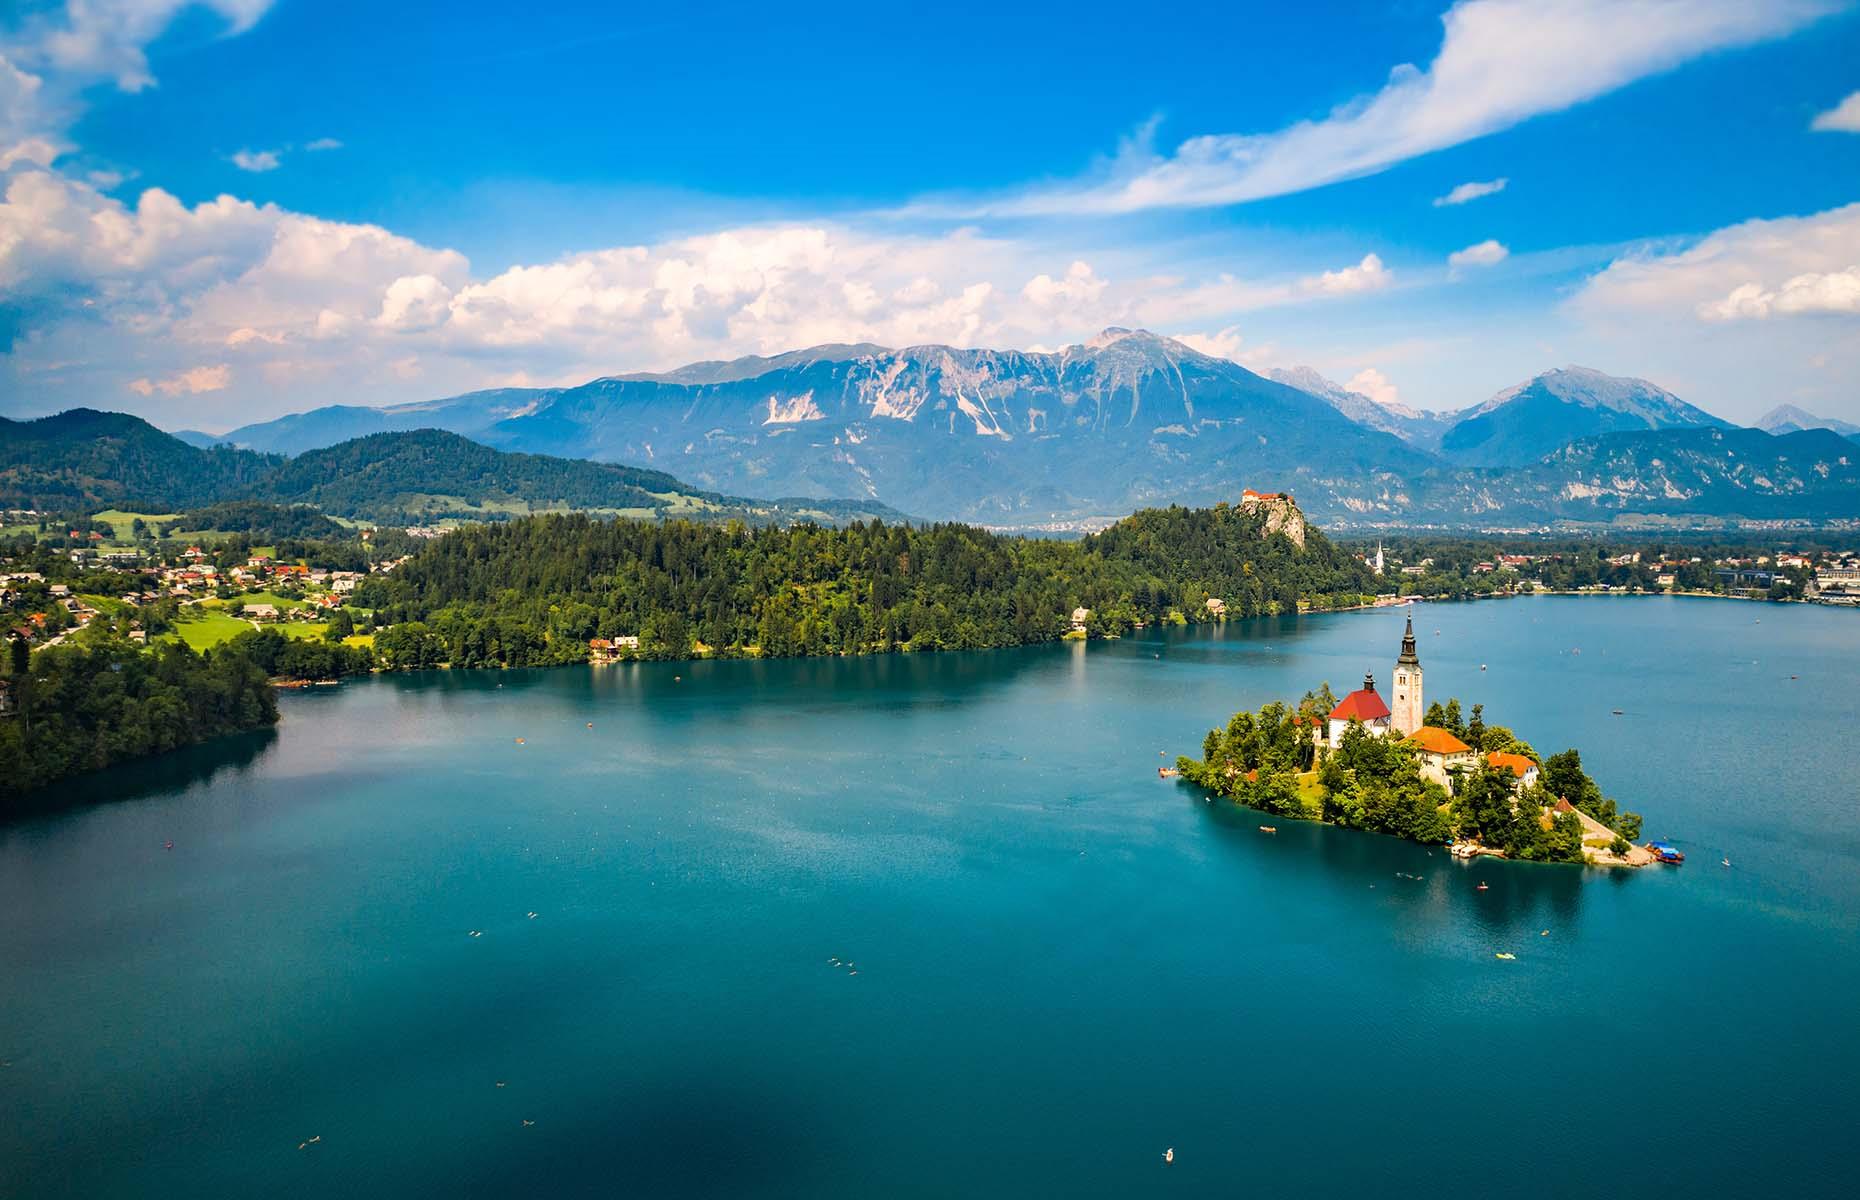 There are so many reasons to visit Slovenia, and Lake Bled, located 34 miles (55km) from the capital city Ljubljana, is certainly one of them. Flanked by the towering Julian Alps and close to Triglav National Park, this emerald-hued expanse is known for its ‘healing’ mineral-rich waters and alpine beauty. In the center of Lake Bled lies the striking Church of the Mother of God, perched upon Slovenia’s only natural island.